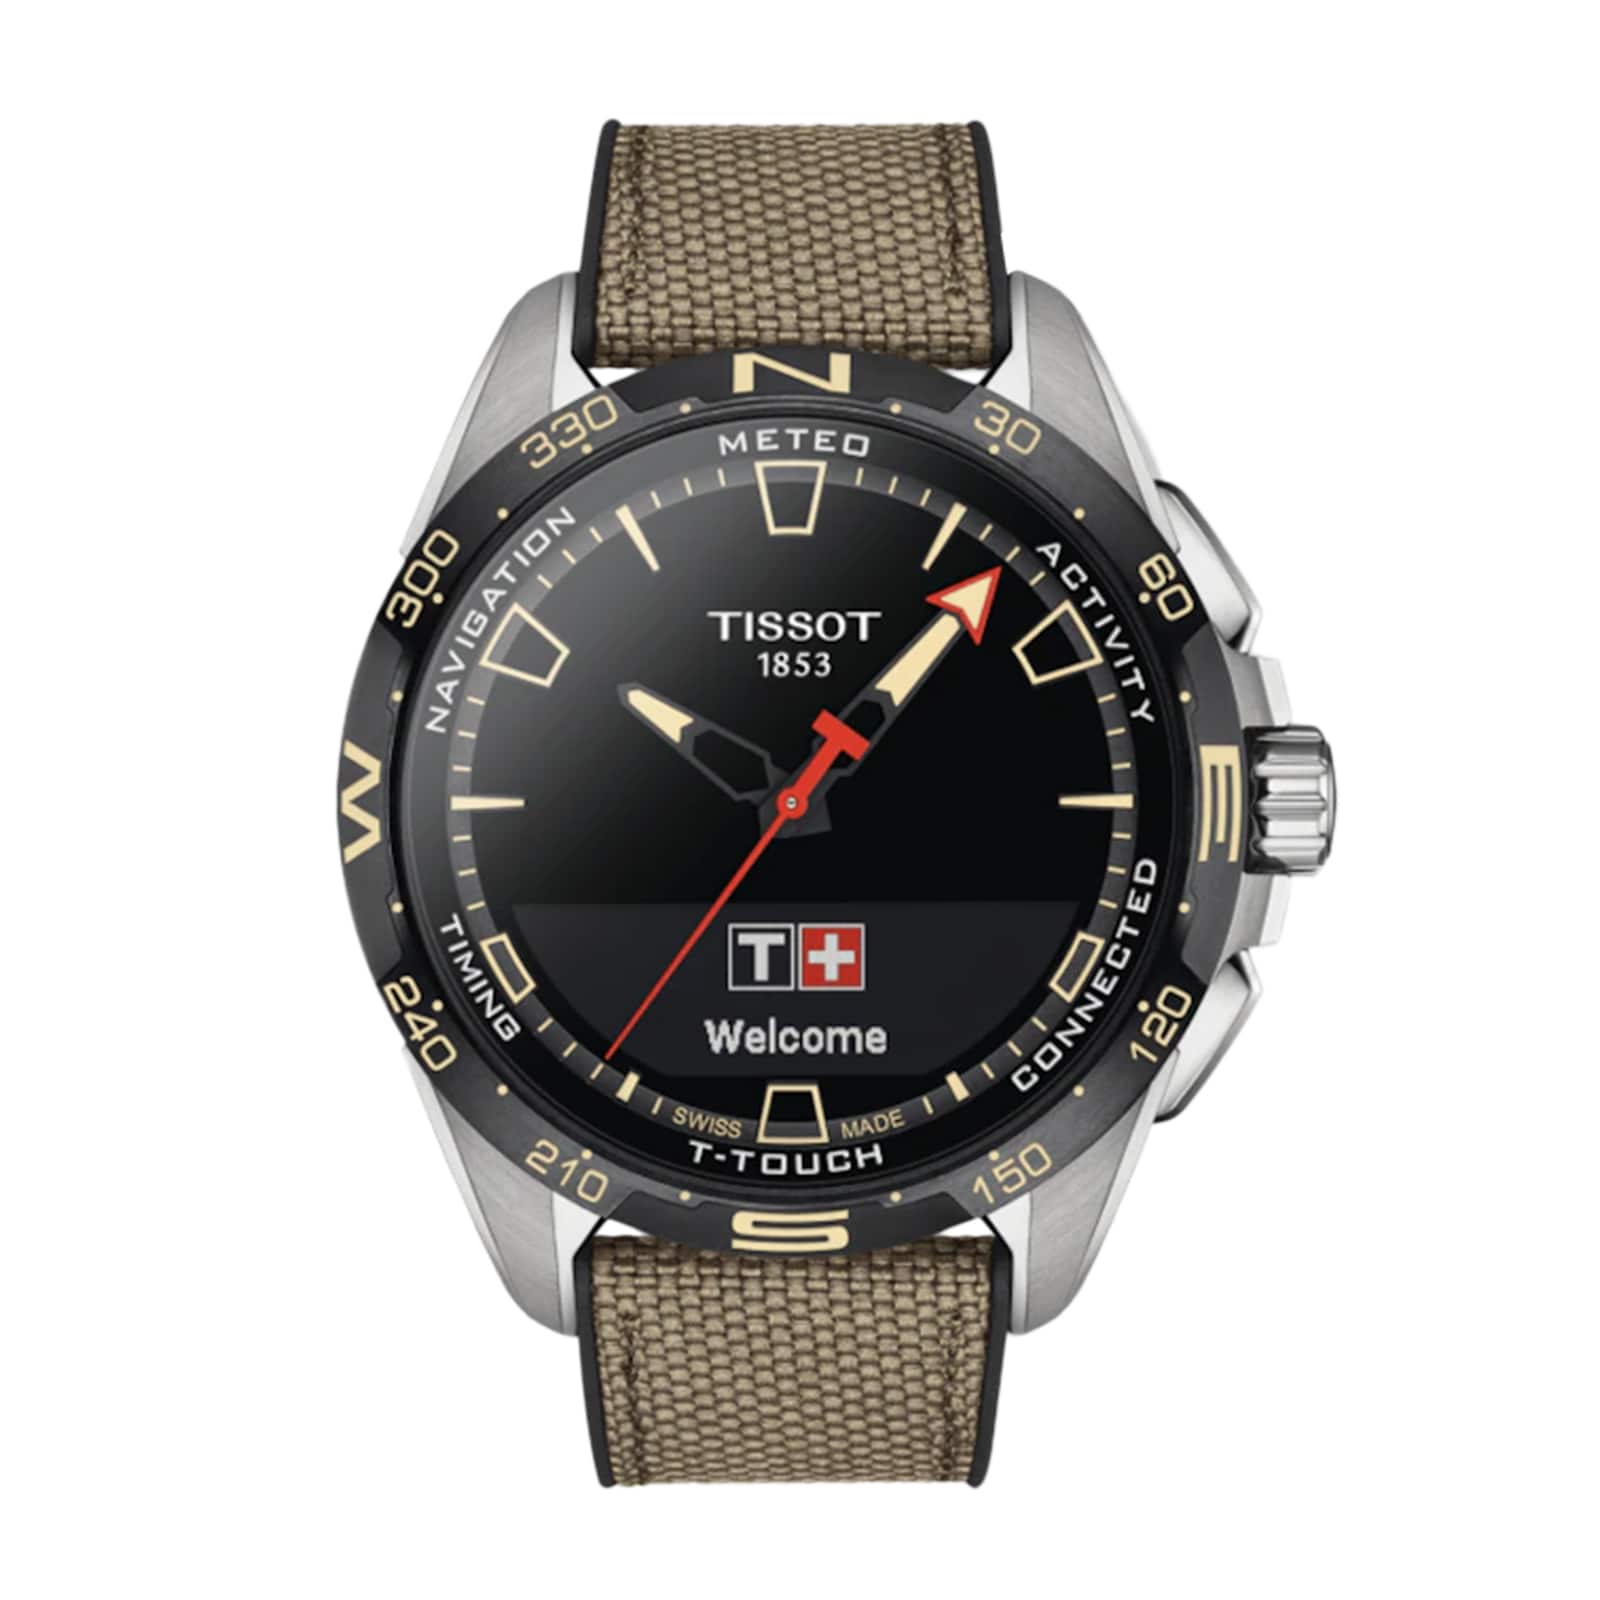 Photos - Smartwatches TISSOT T-Touch Solar Connect 47.5mm Watch 